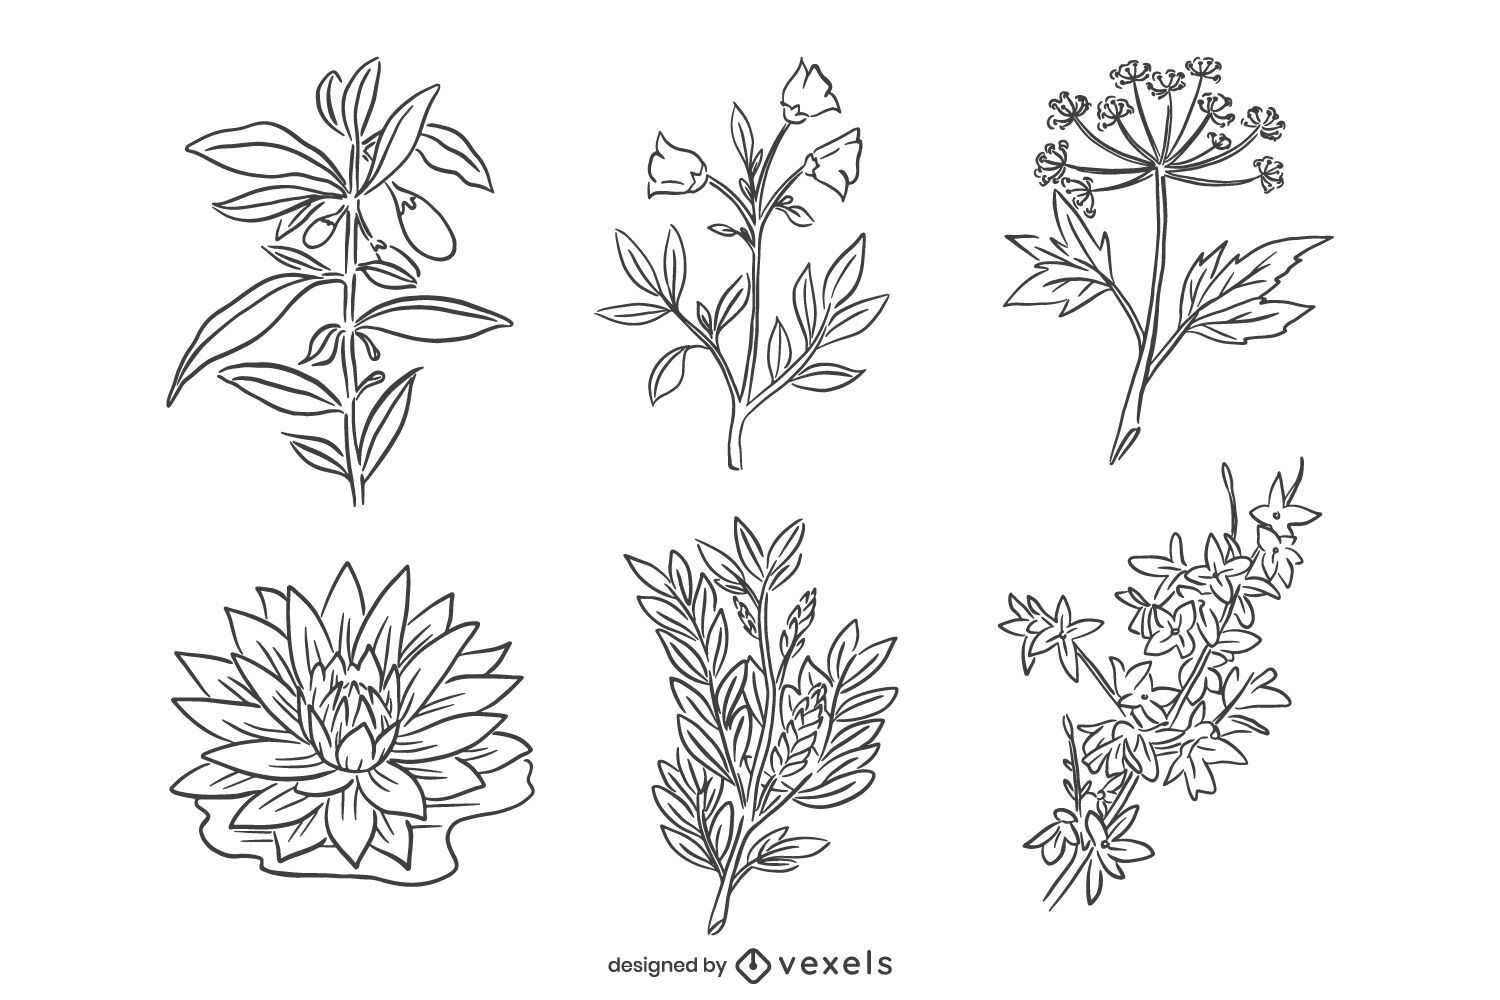 Chinese Hand-drawn Stroke Flower Pack